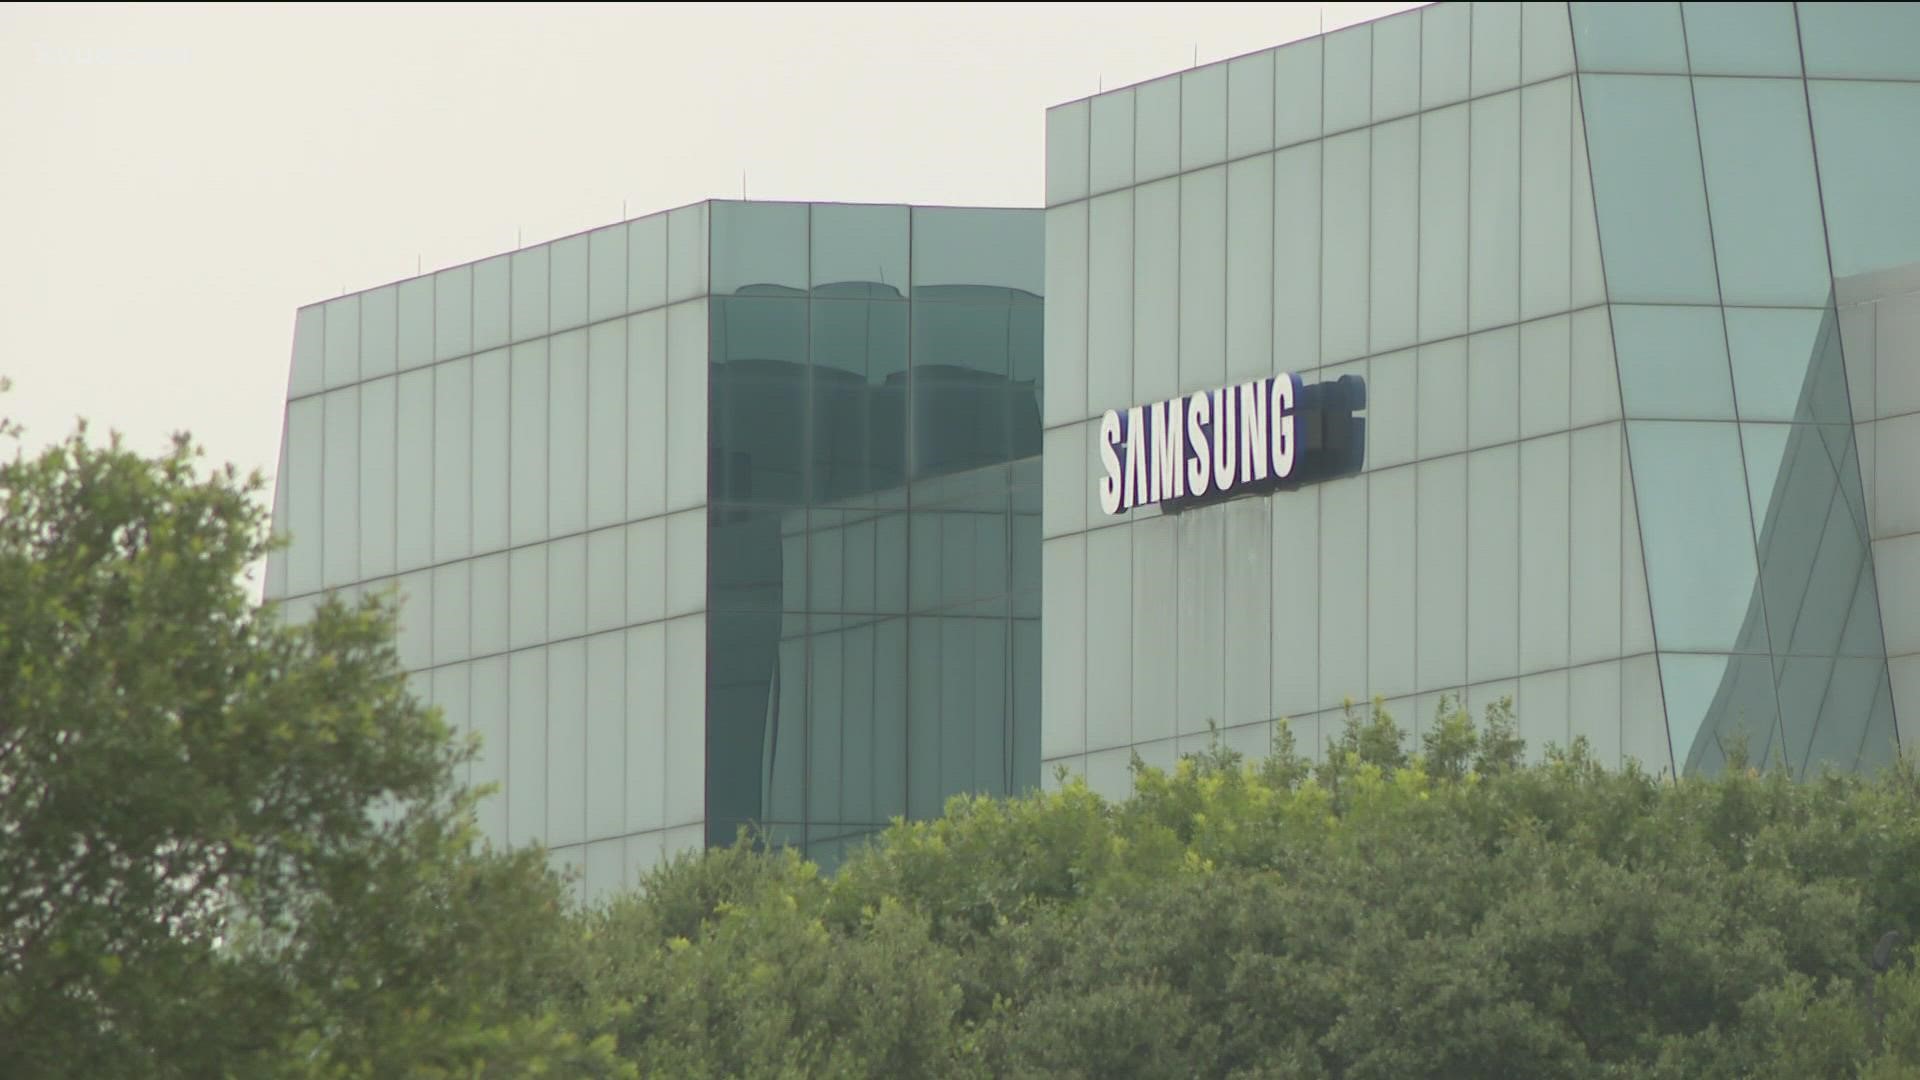 Samsung could expand from Austin to a small Central Texas town. Taylor is in the running, so here's how an expansion could affect the community.